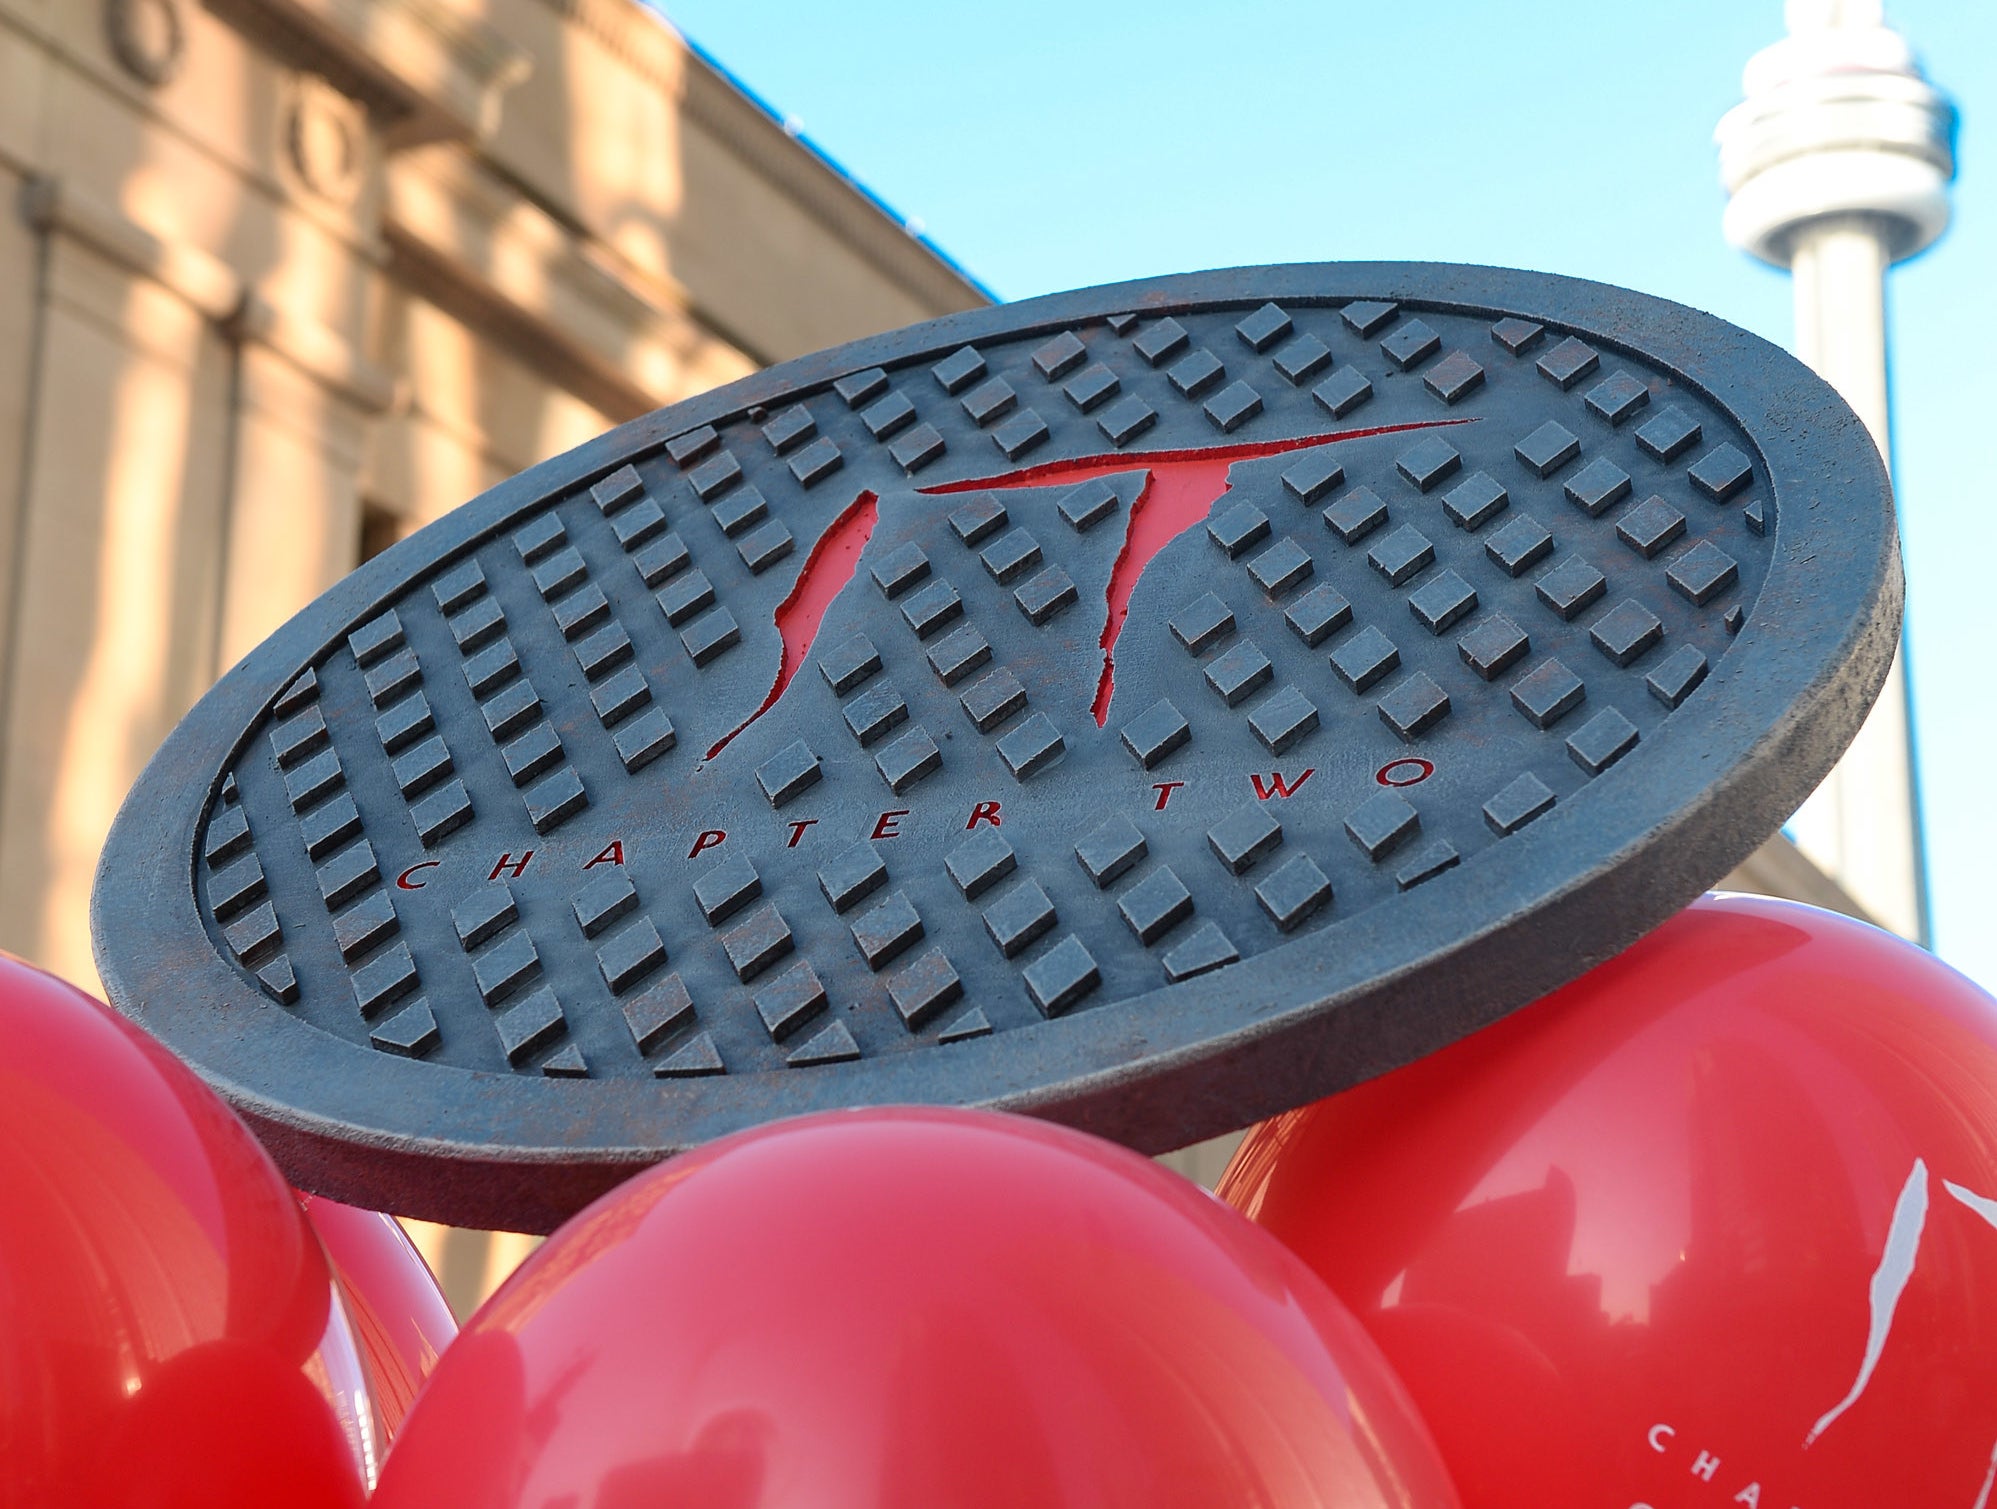 A manhole cover floating on top of balloons as advertising for IT: Chapter Two